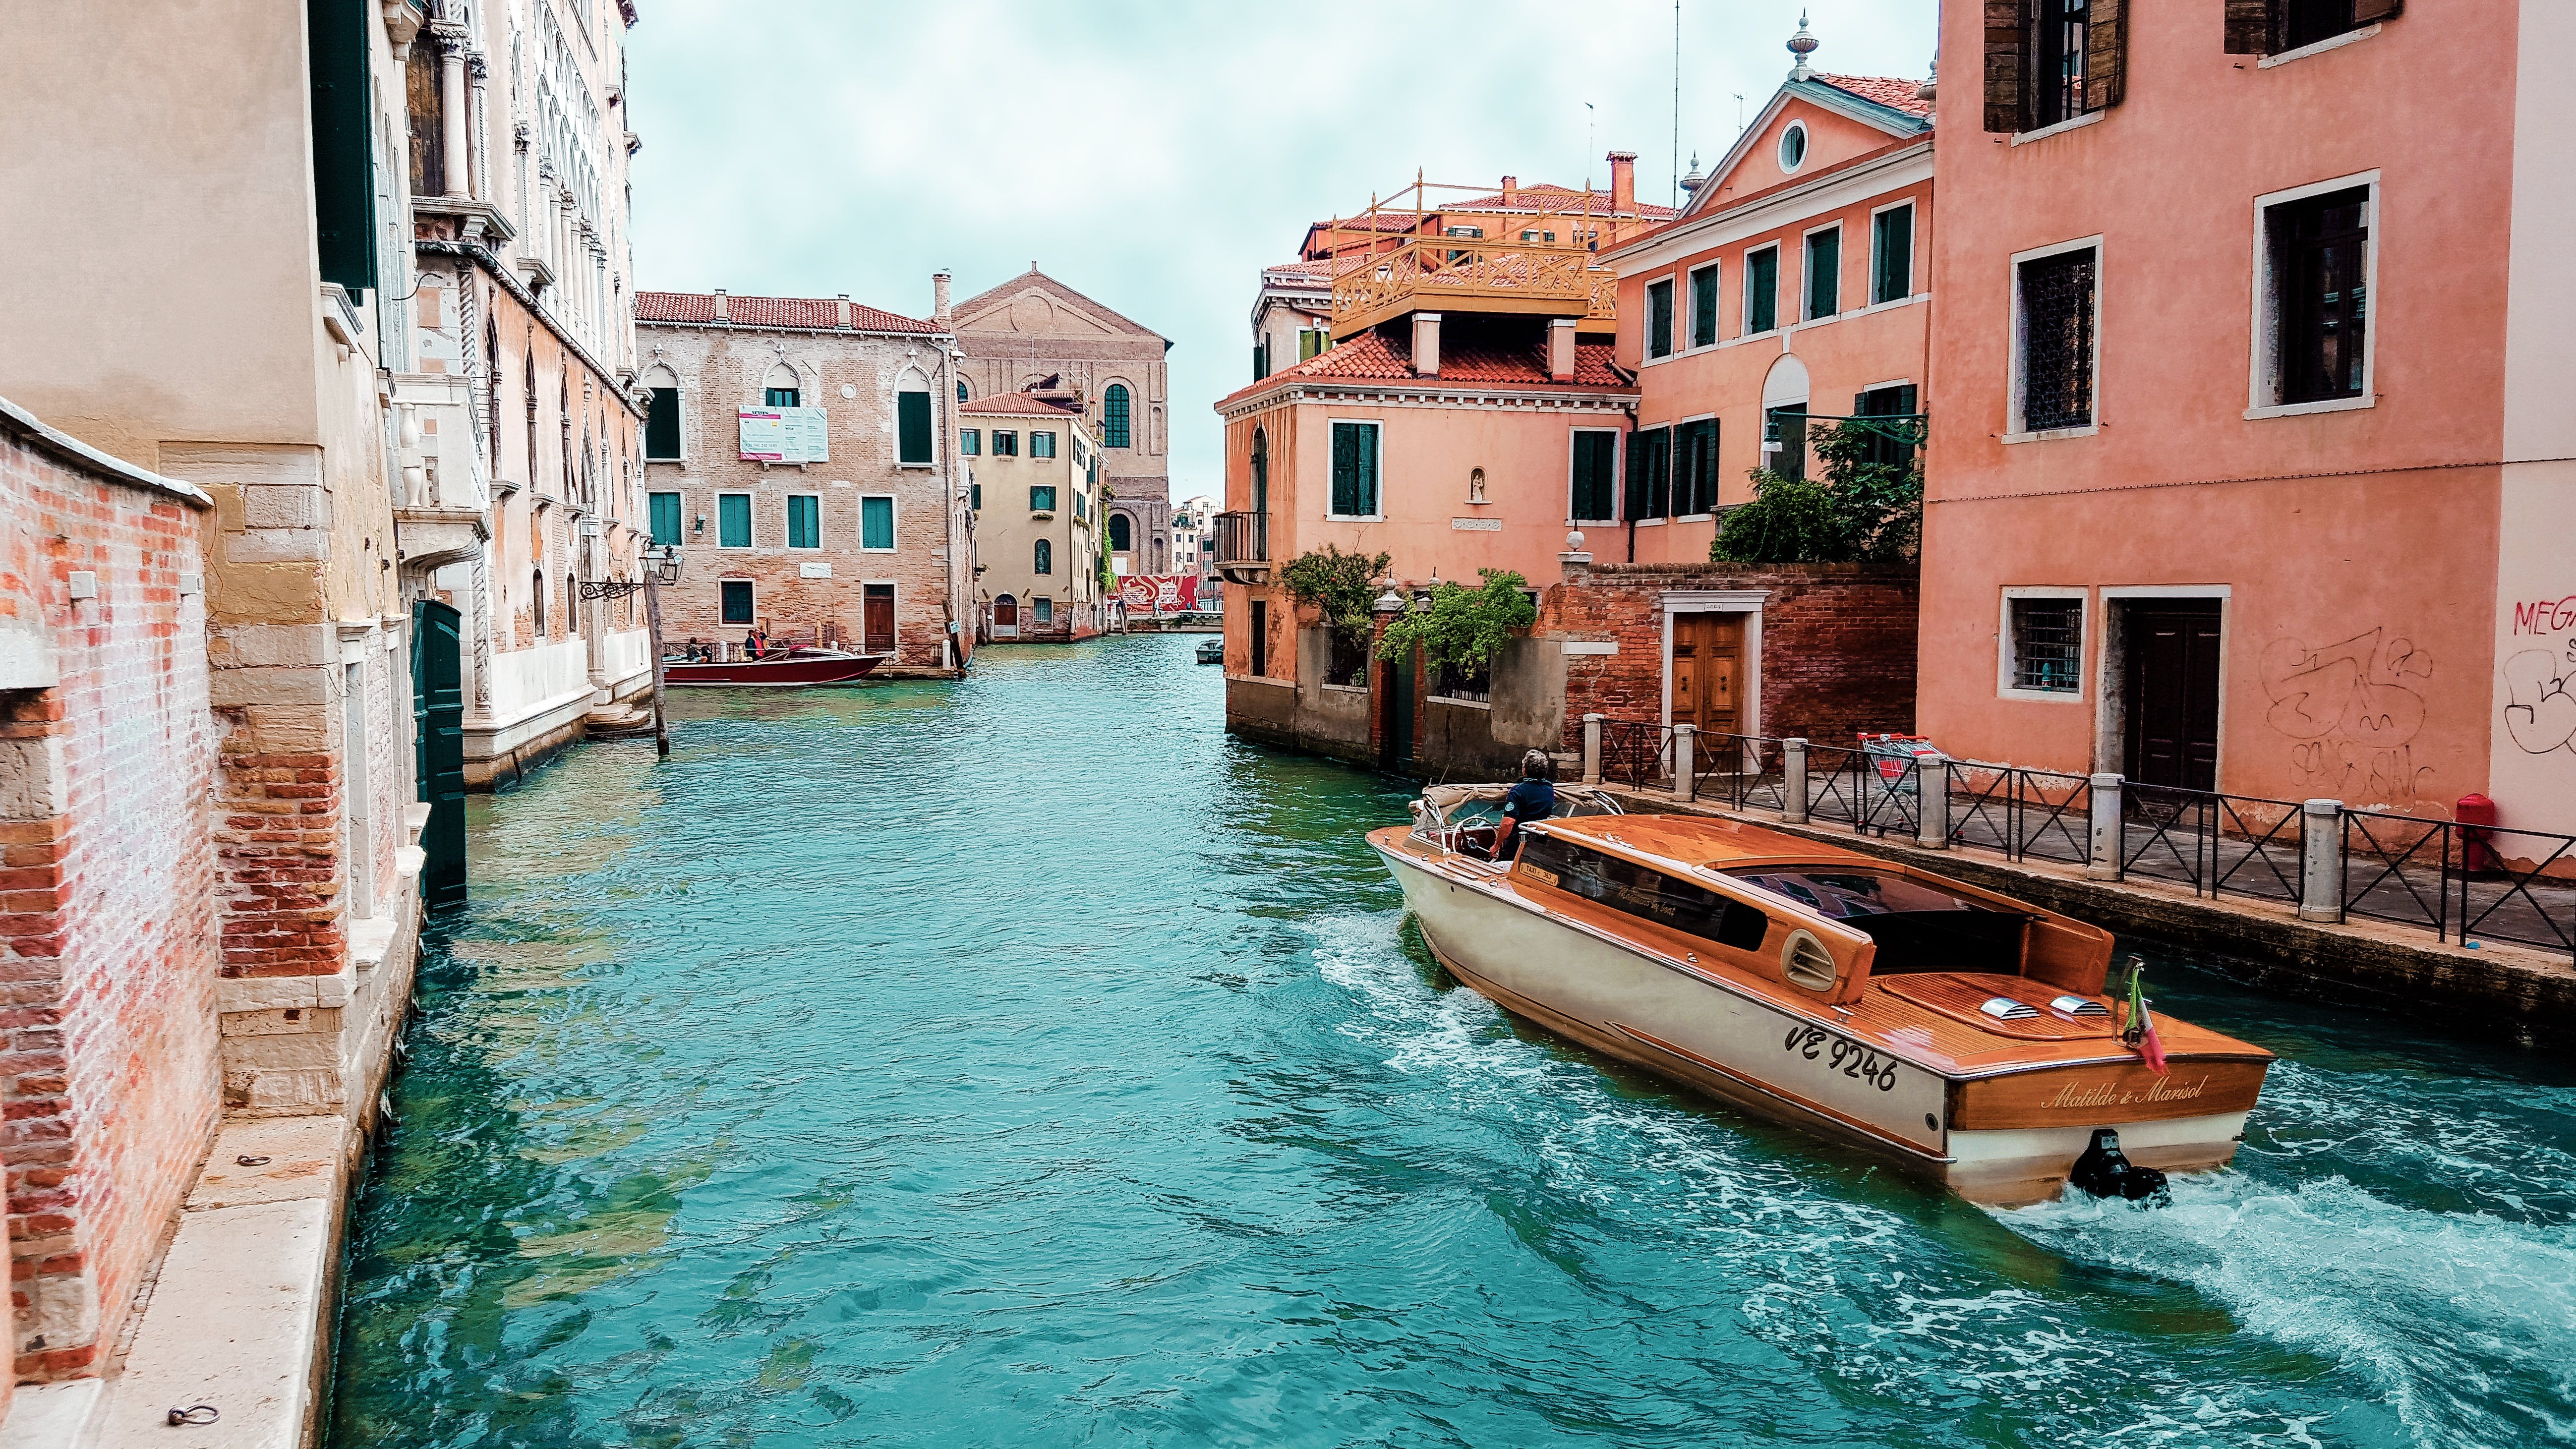 Visit Italy this Holiday season 
Venice from $89